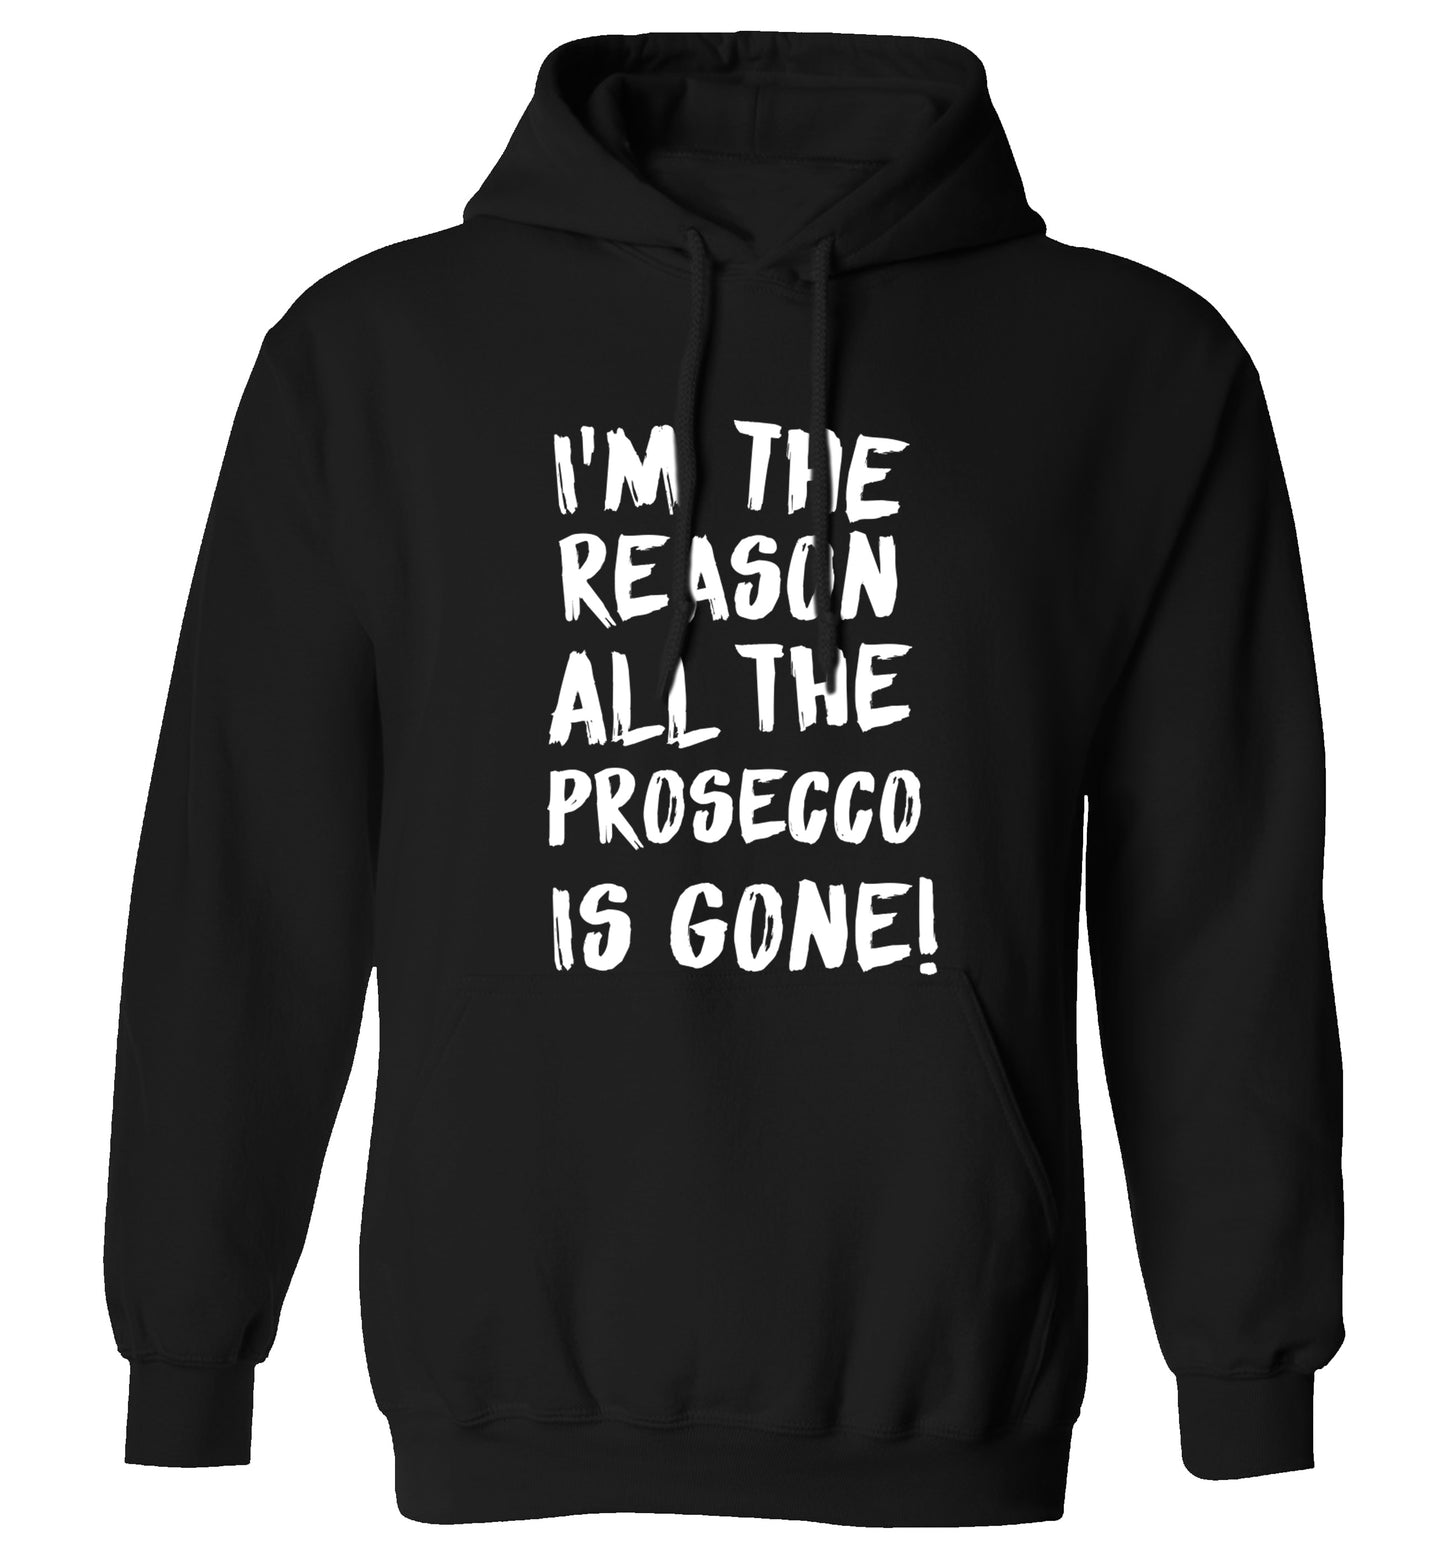 I'm the reason all the prosecco is gone adults unisex black hoodie 2XL